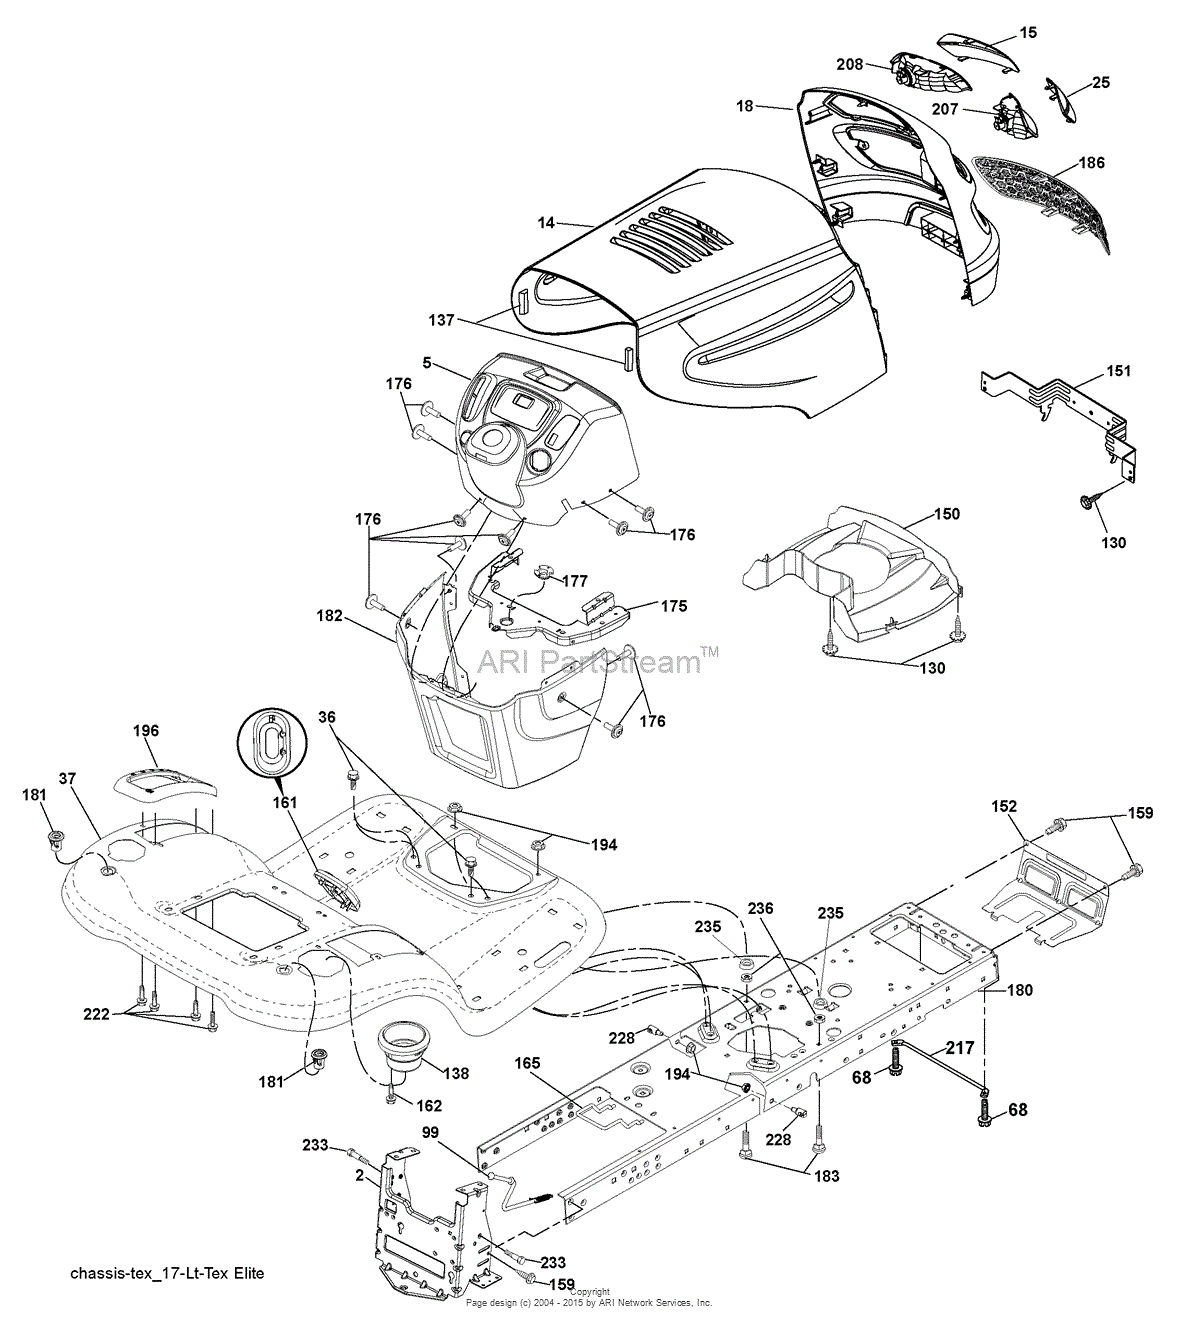 AYP/Electrolux PB24H54YT, 96042003900 (2006-12) Parts Diagram for Chassis